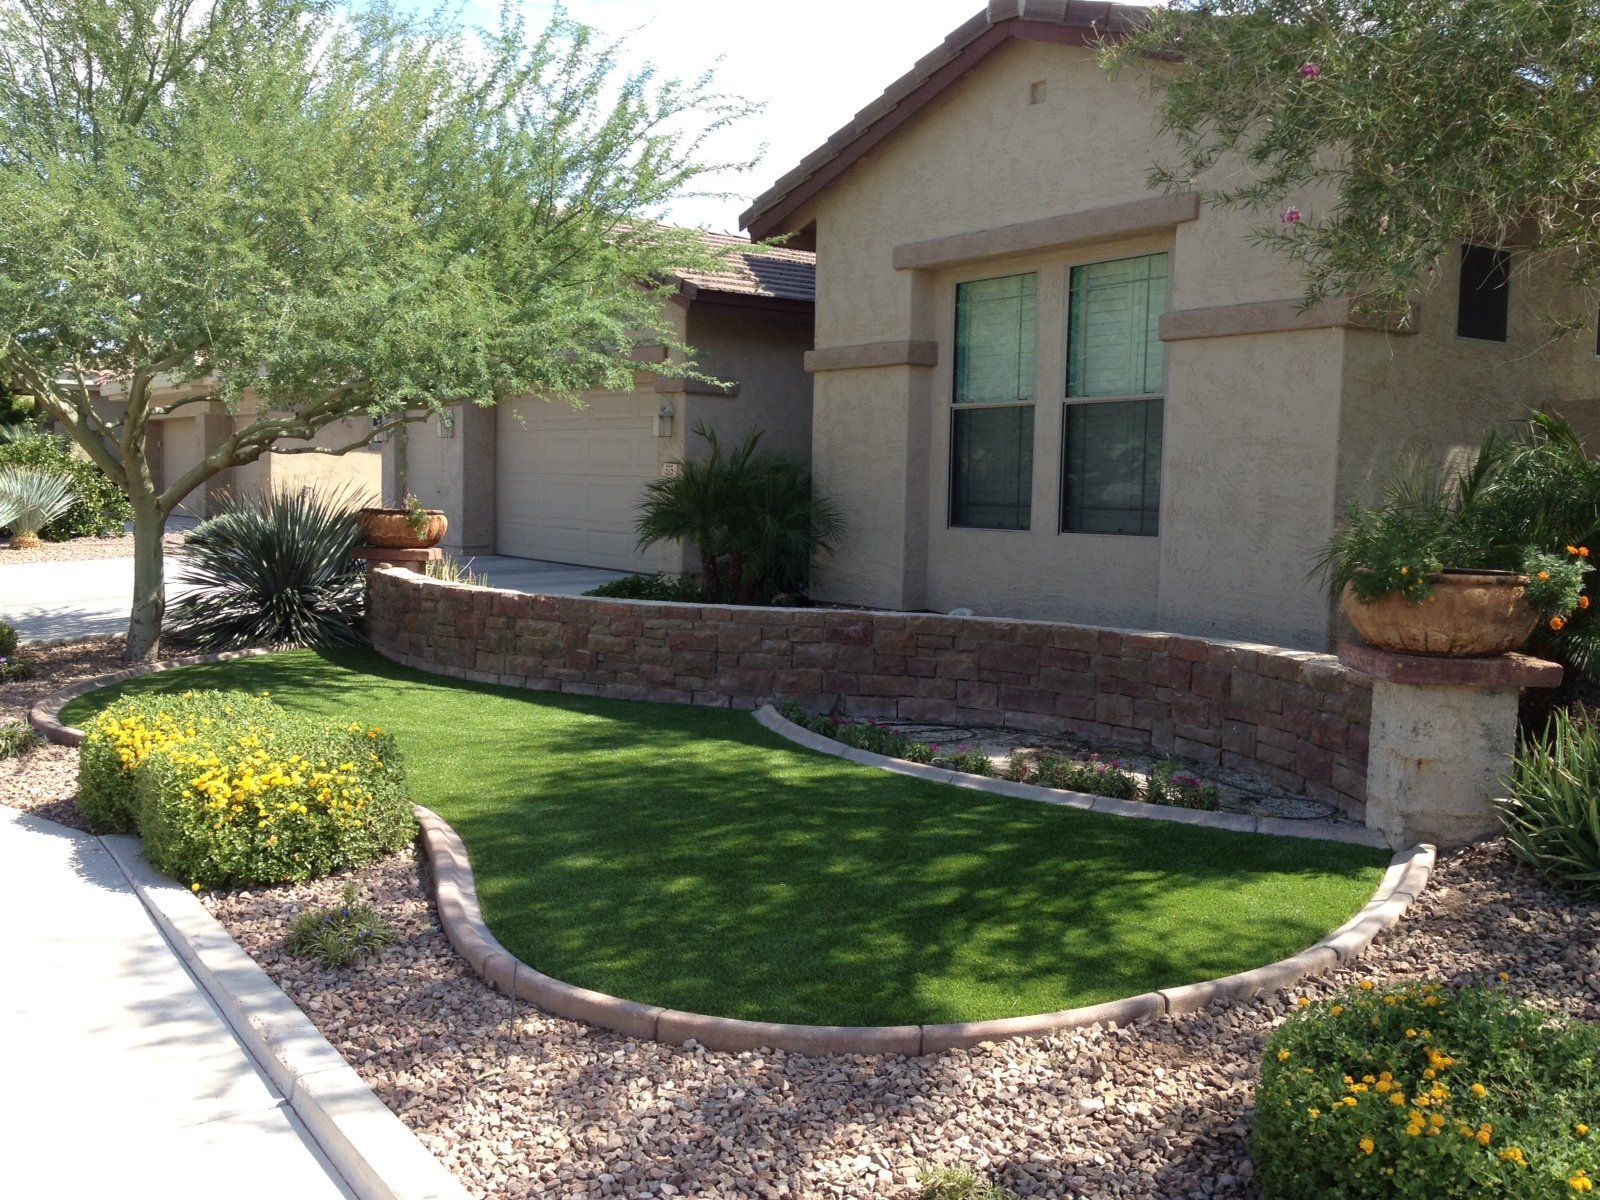 The owner of this property in Tempe, AZ has surely taken advantage of artificial grass in making their landscape aesthetically pleasing.